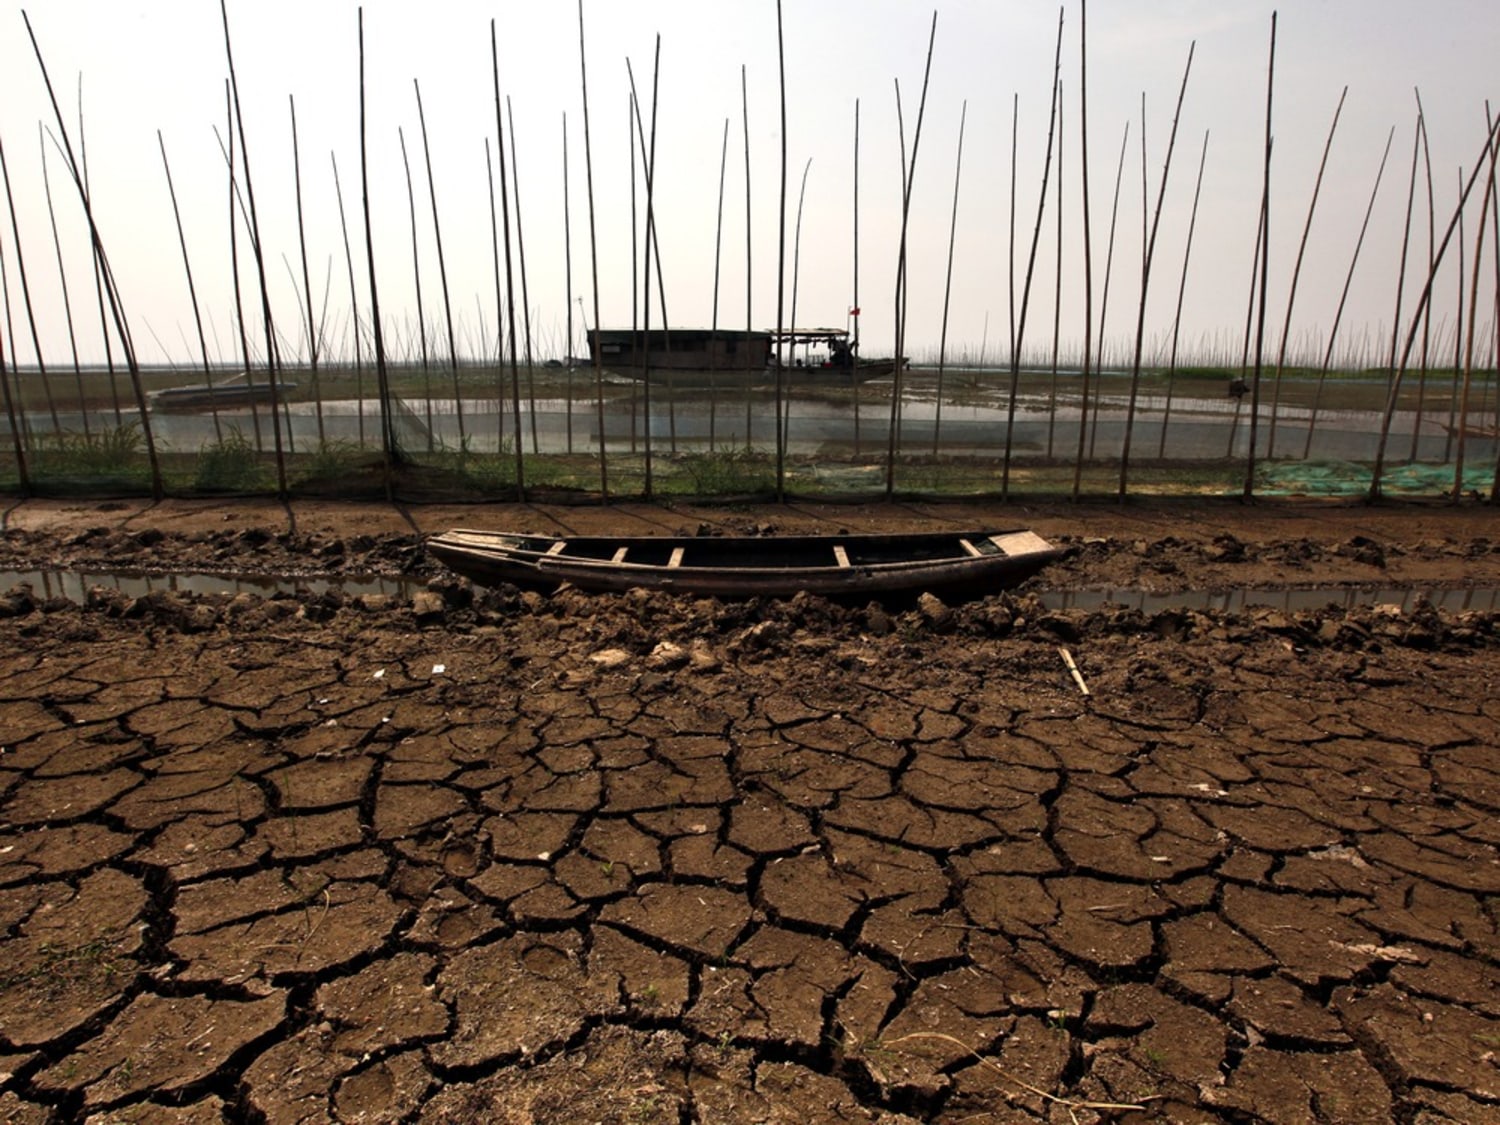 Drought parches China's 'land of fish and rice